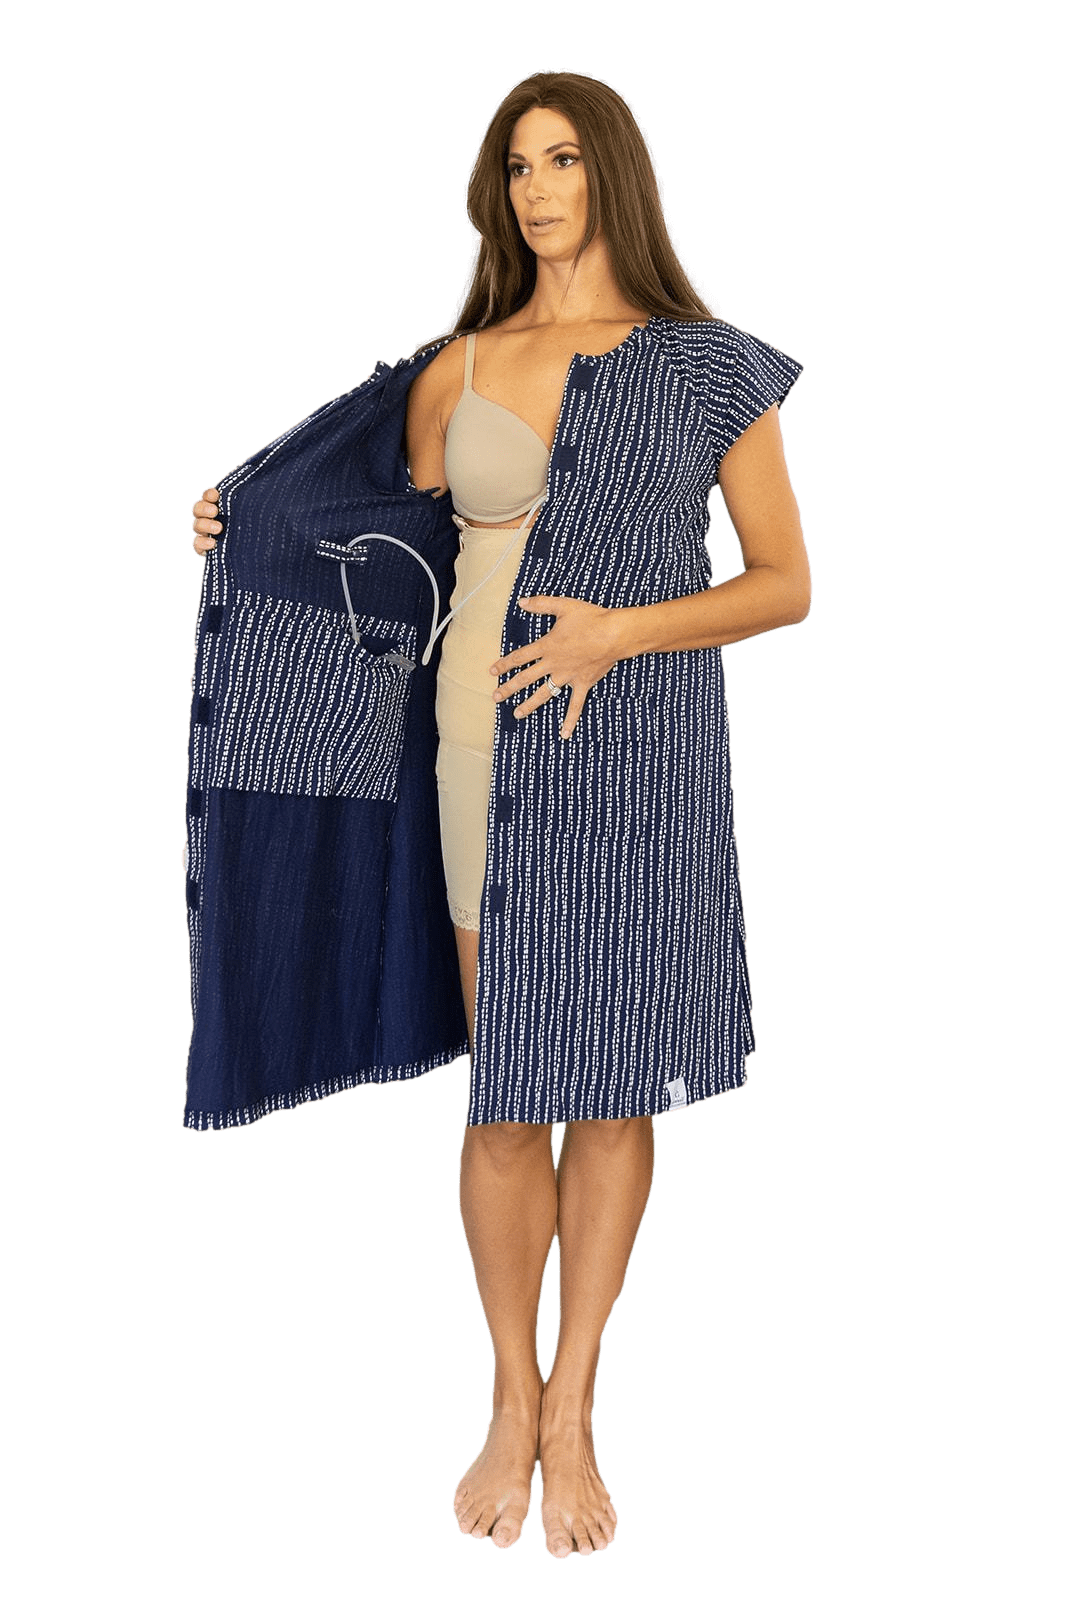 Any Urology / Maternity Gown at Best Price in Muradnagar | M. S. Textiles